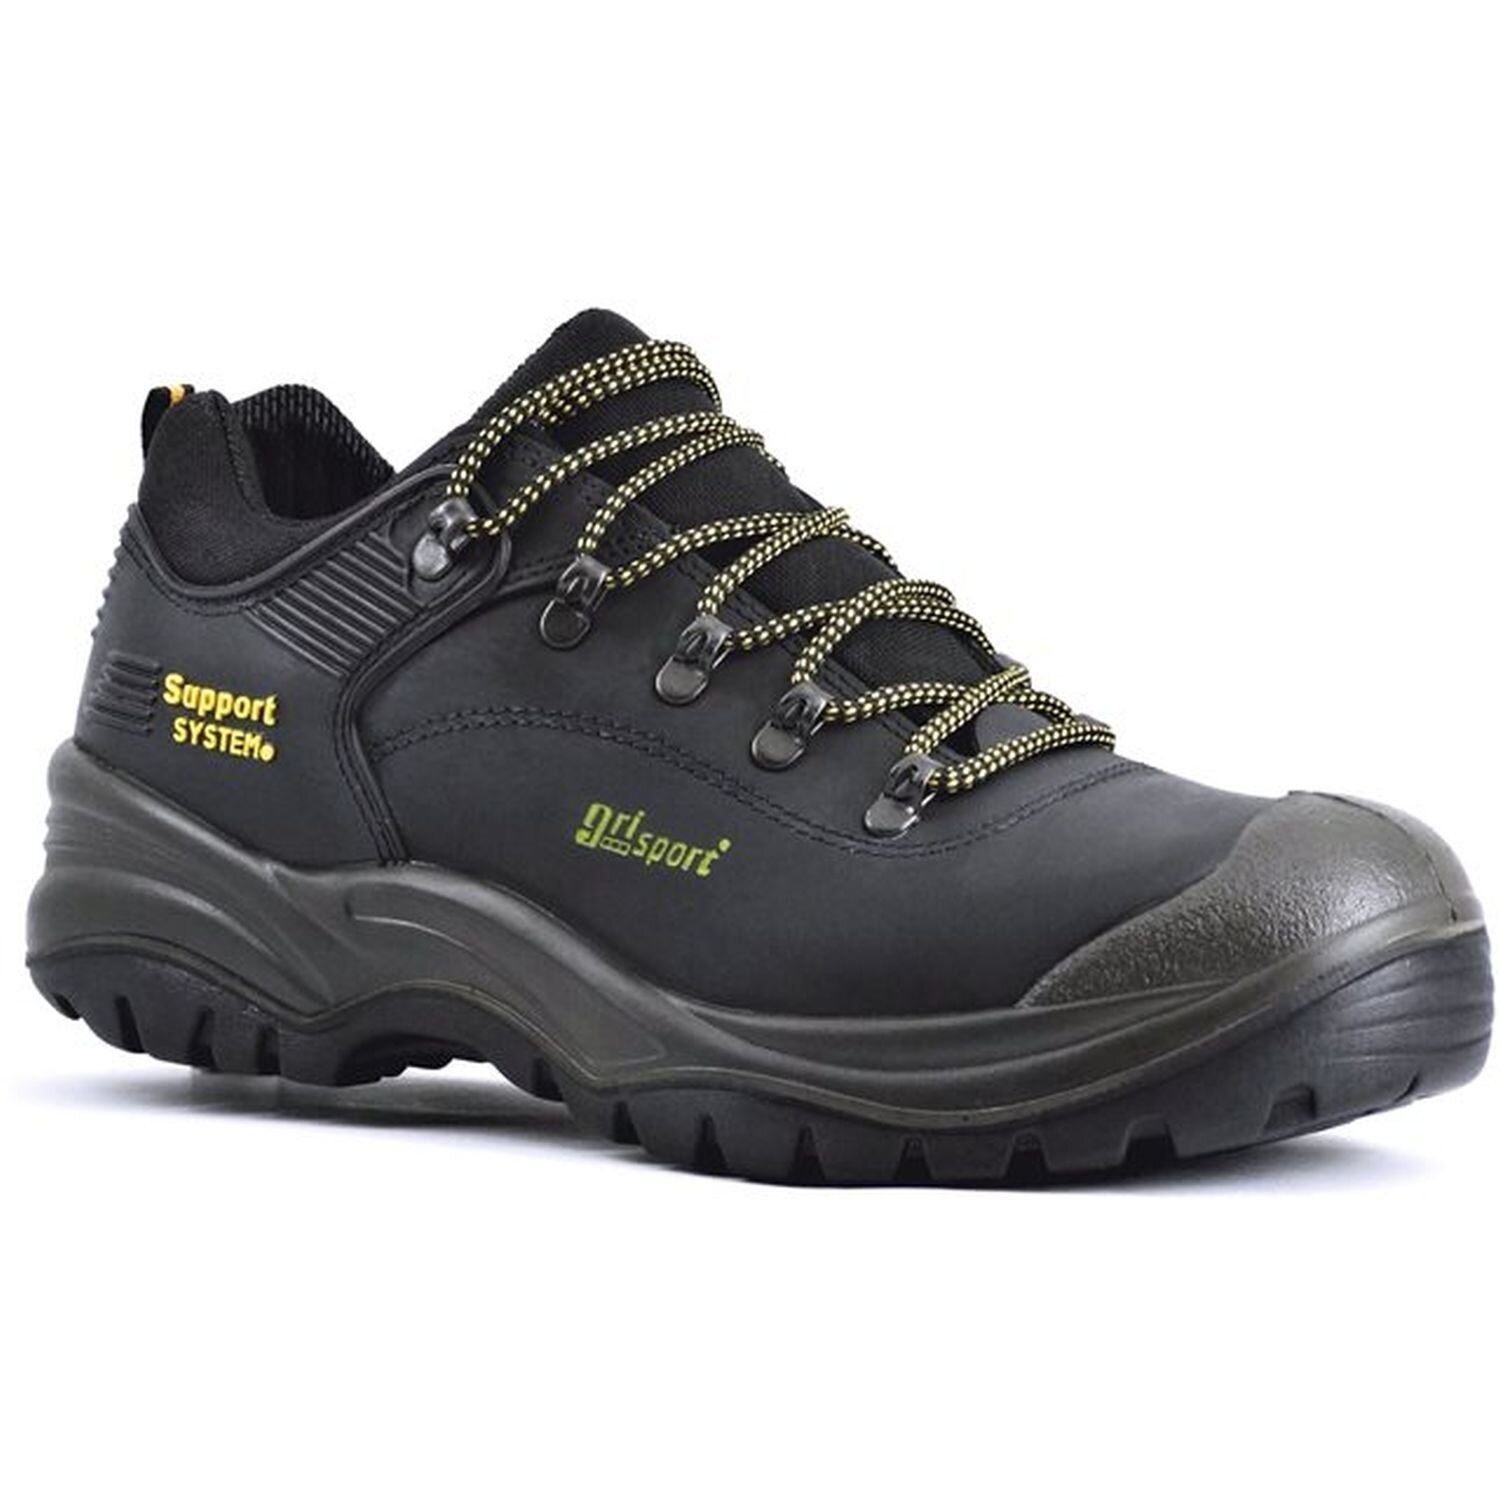 Grisport Tech Steel Midsole And Toe Safety Shoe